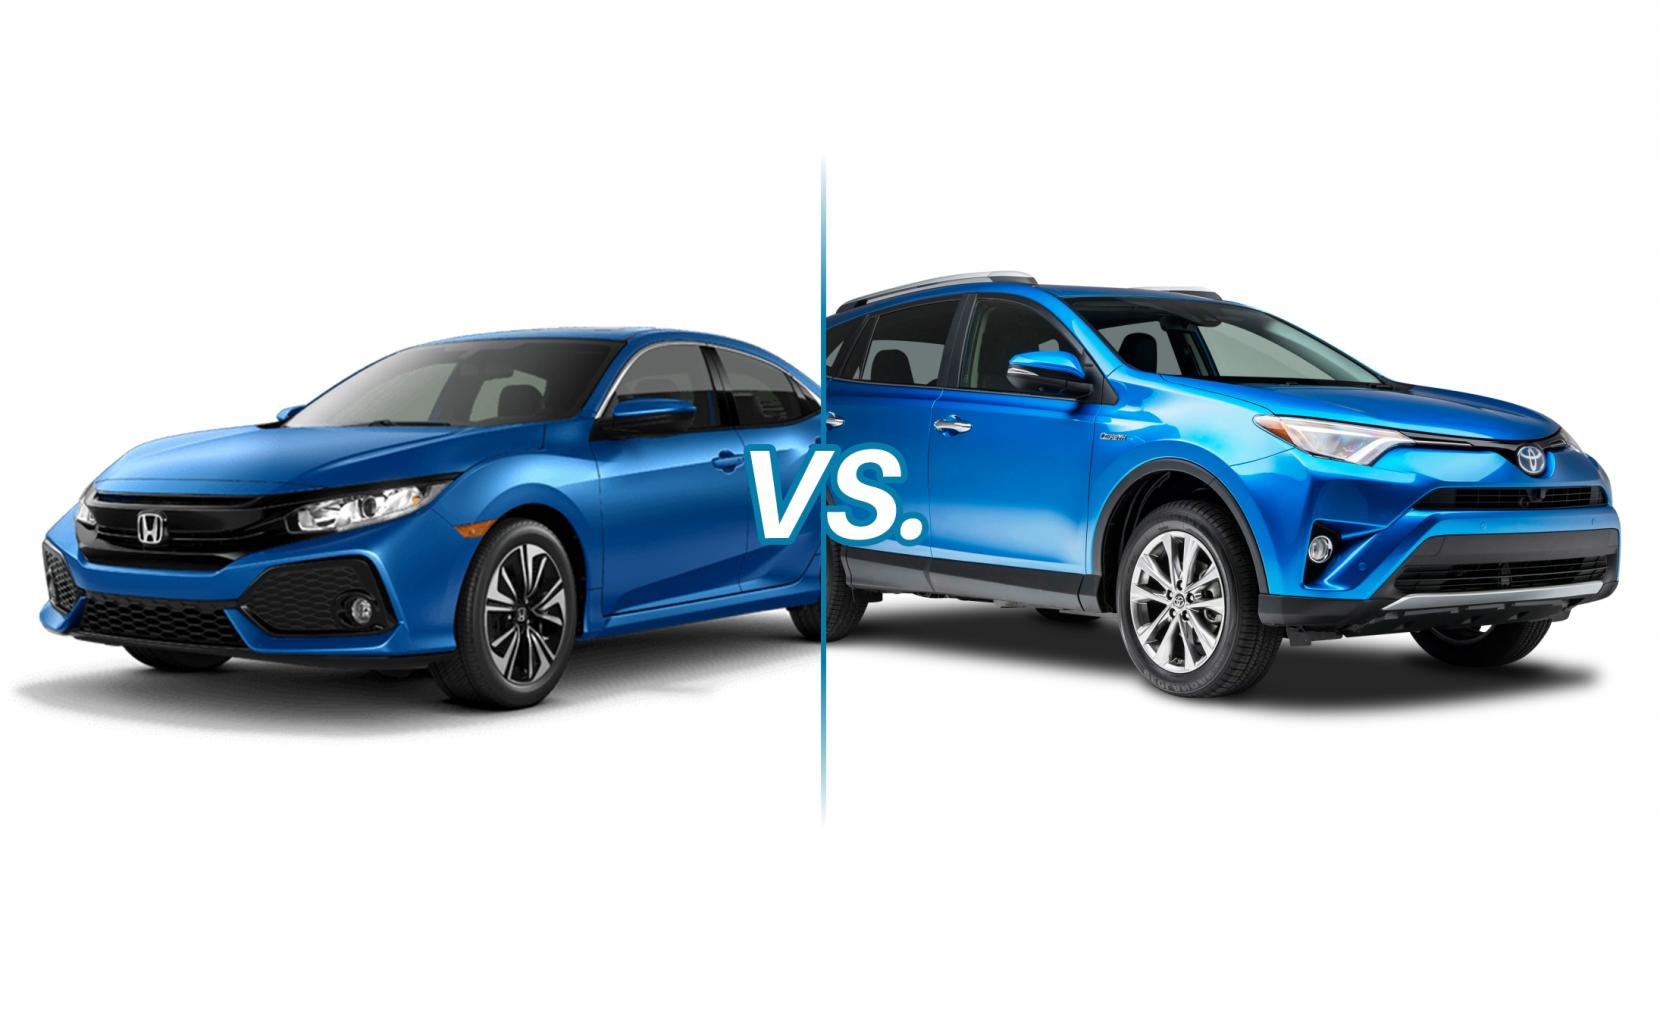 Sedans Vs. SUVs - Which is Right for You?